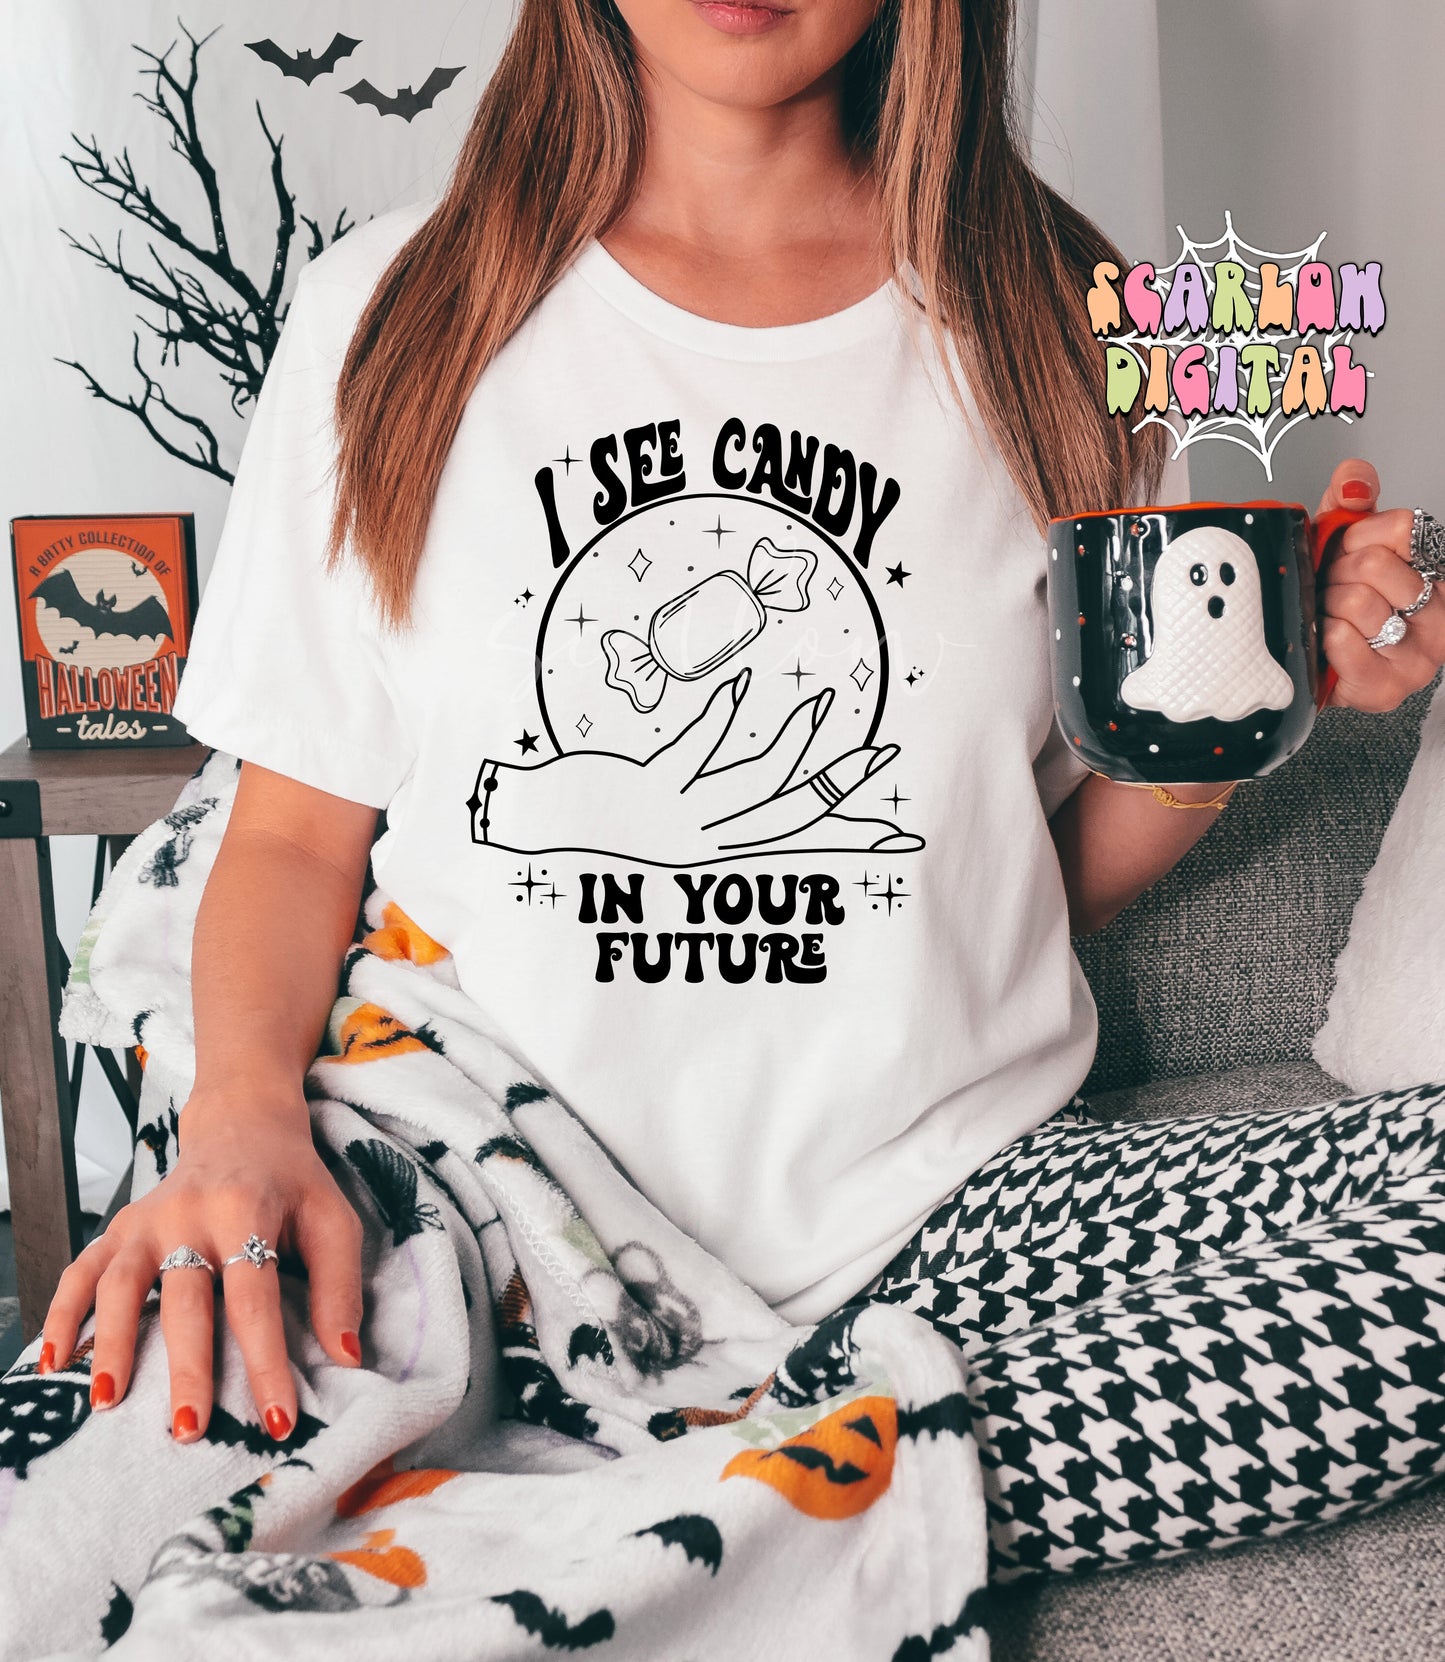 I See Candy in Your Future SVG-Halloween Cricut Cut File Digital Design Download-witchcraft svg, crystal ball svg, candy svg, trick or treat